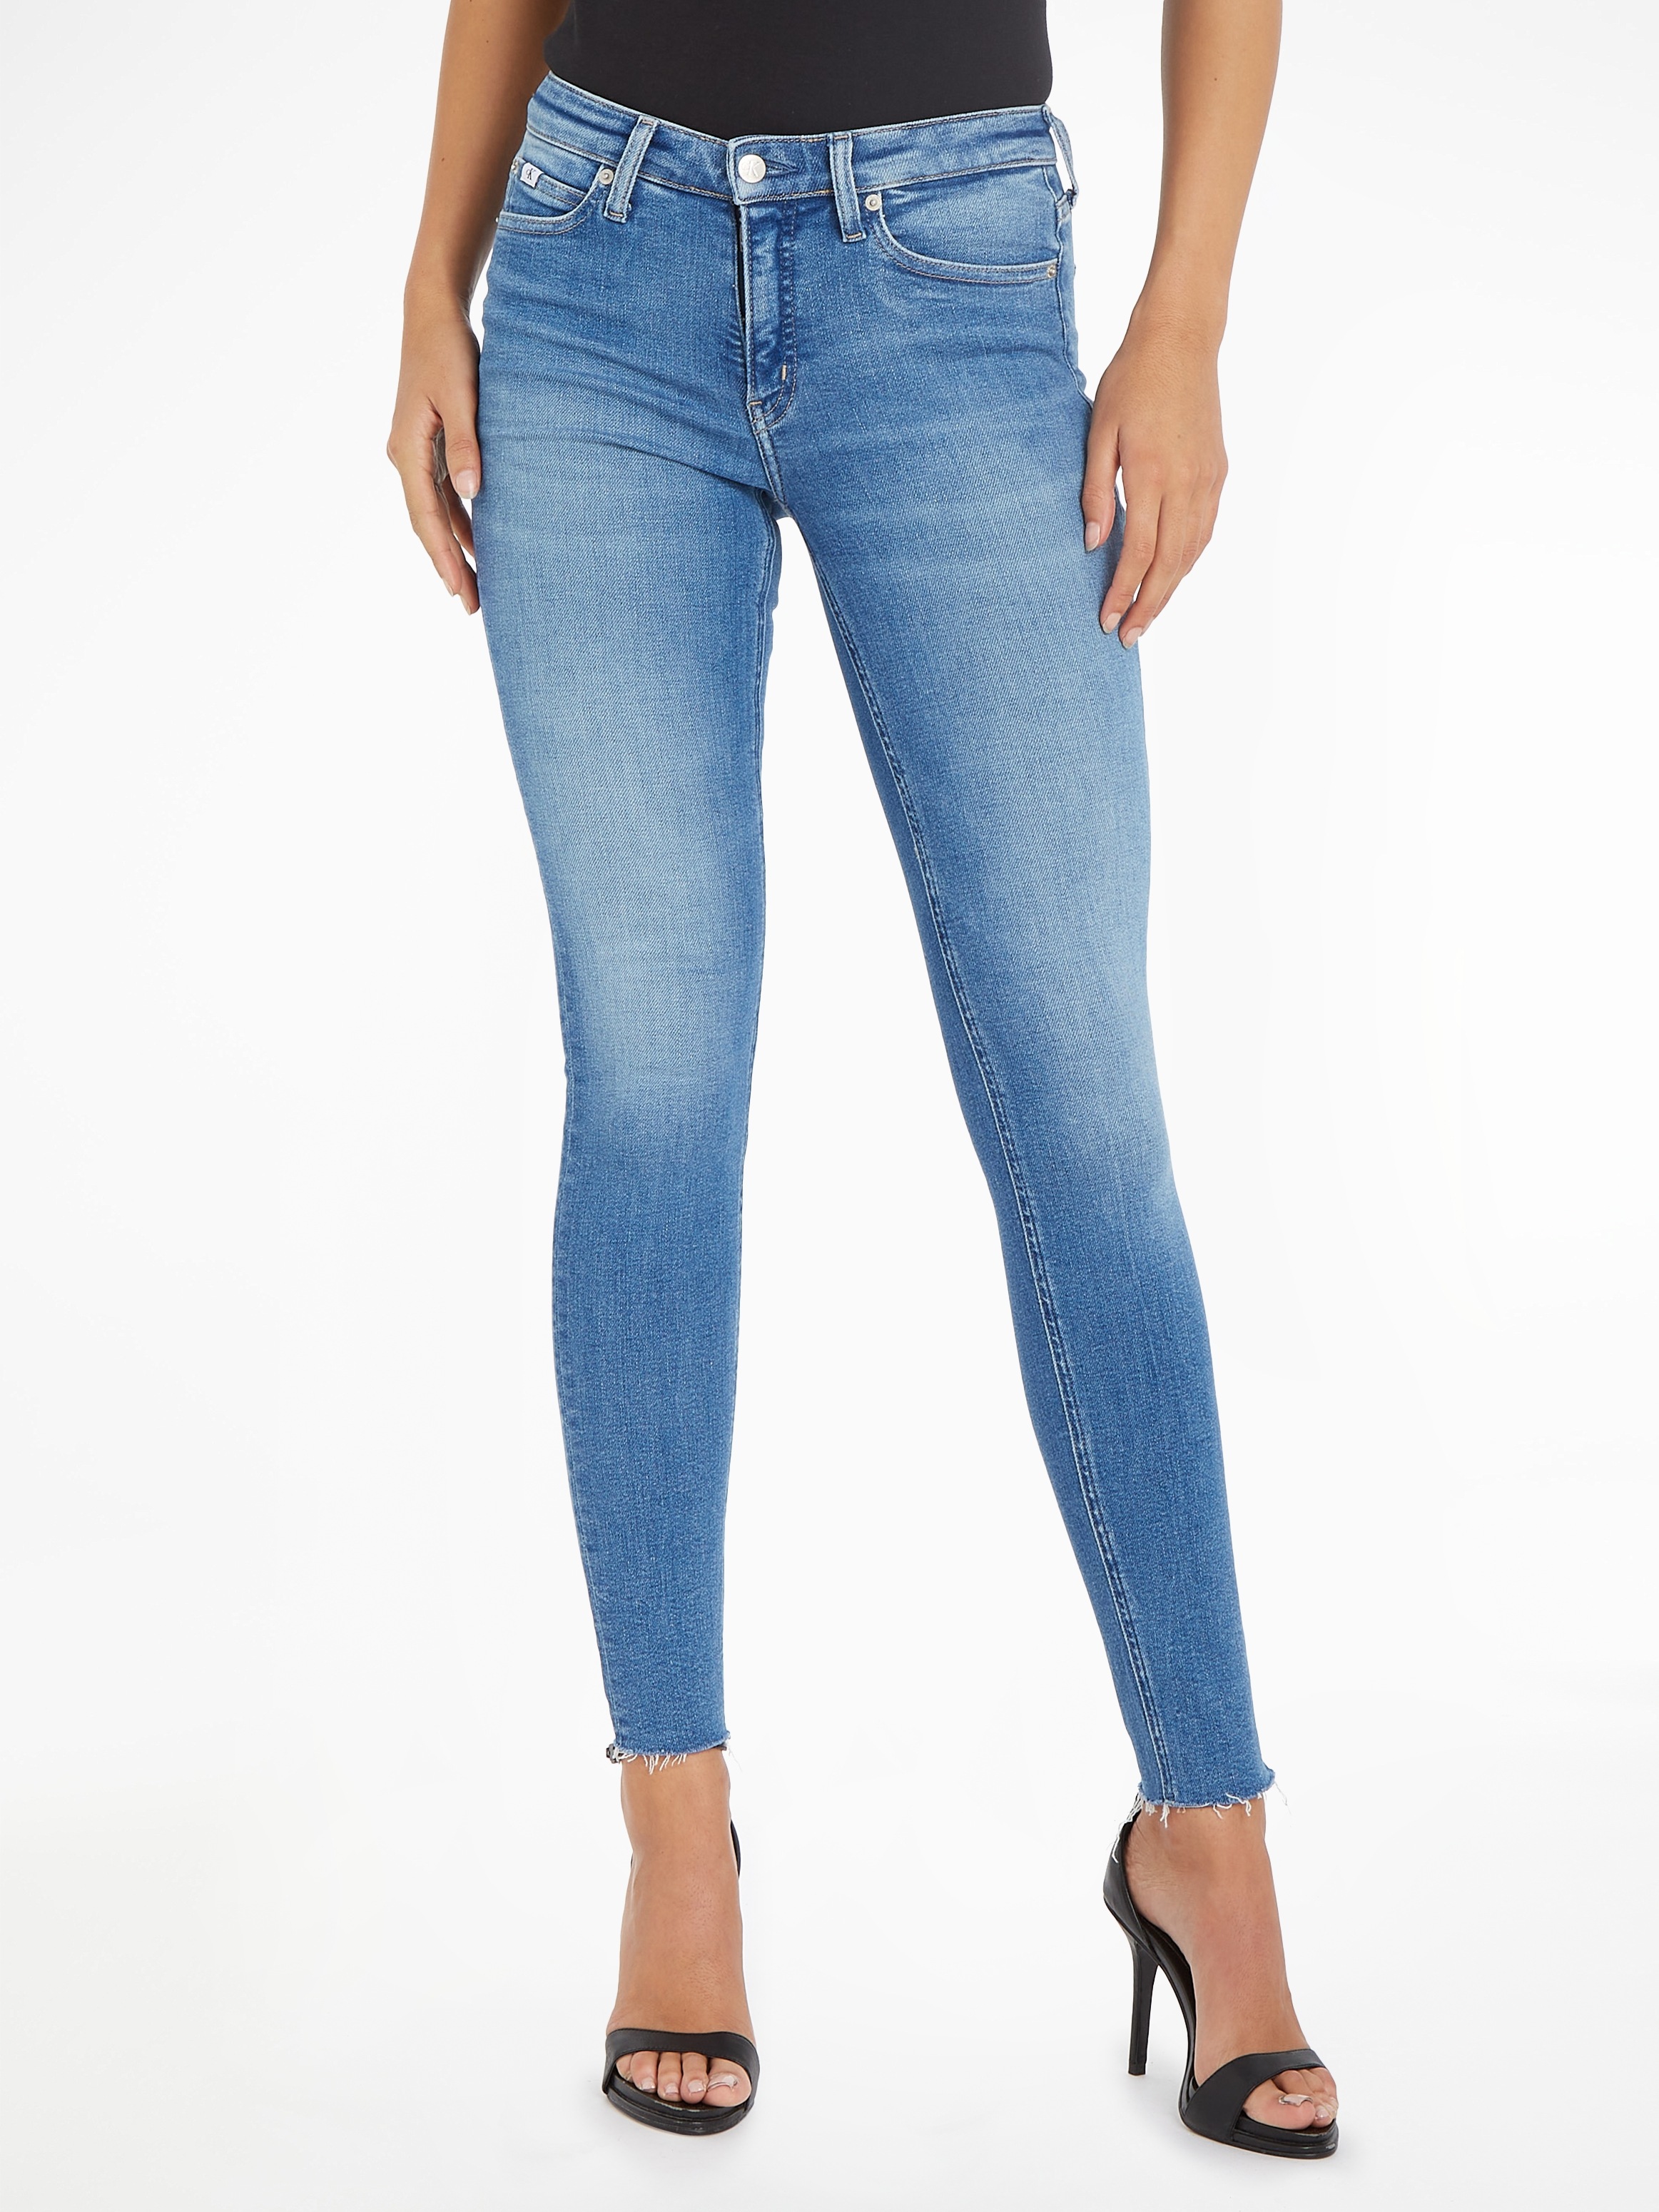 »MID Calvin Klein Jeans Skinny-fit-Jeans RISE | OTTO SKINNY«